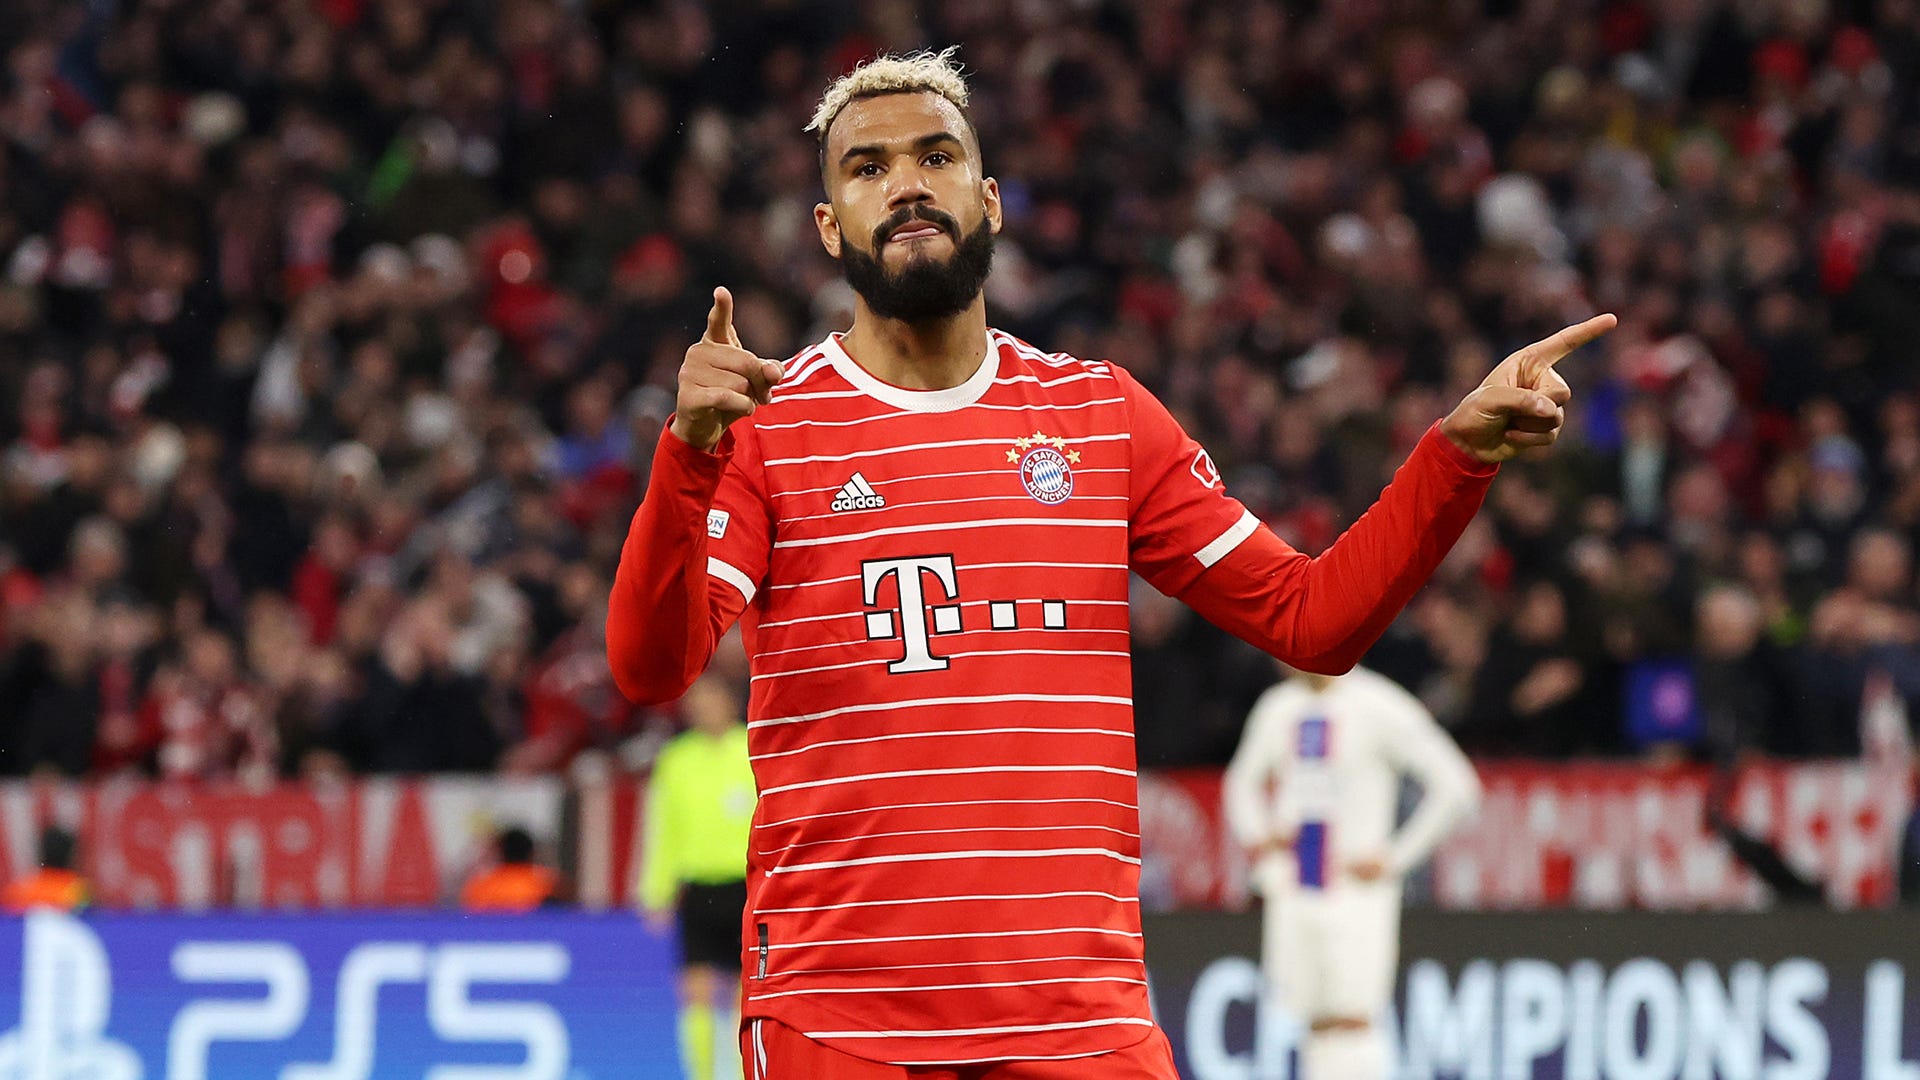 Bayer Leverkusen vs Bayern Munich Live stream, TV channel, kick-off time and where to watch Goal US